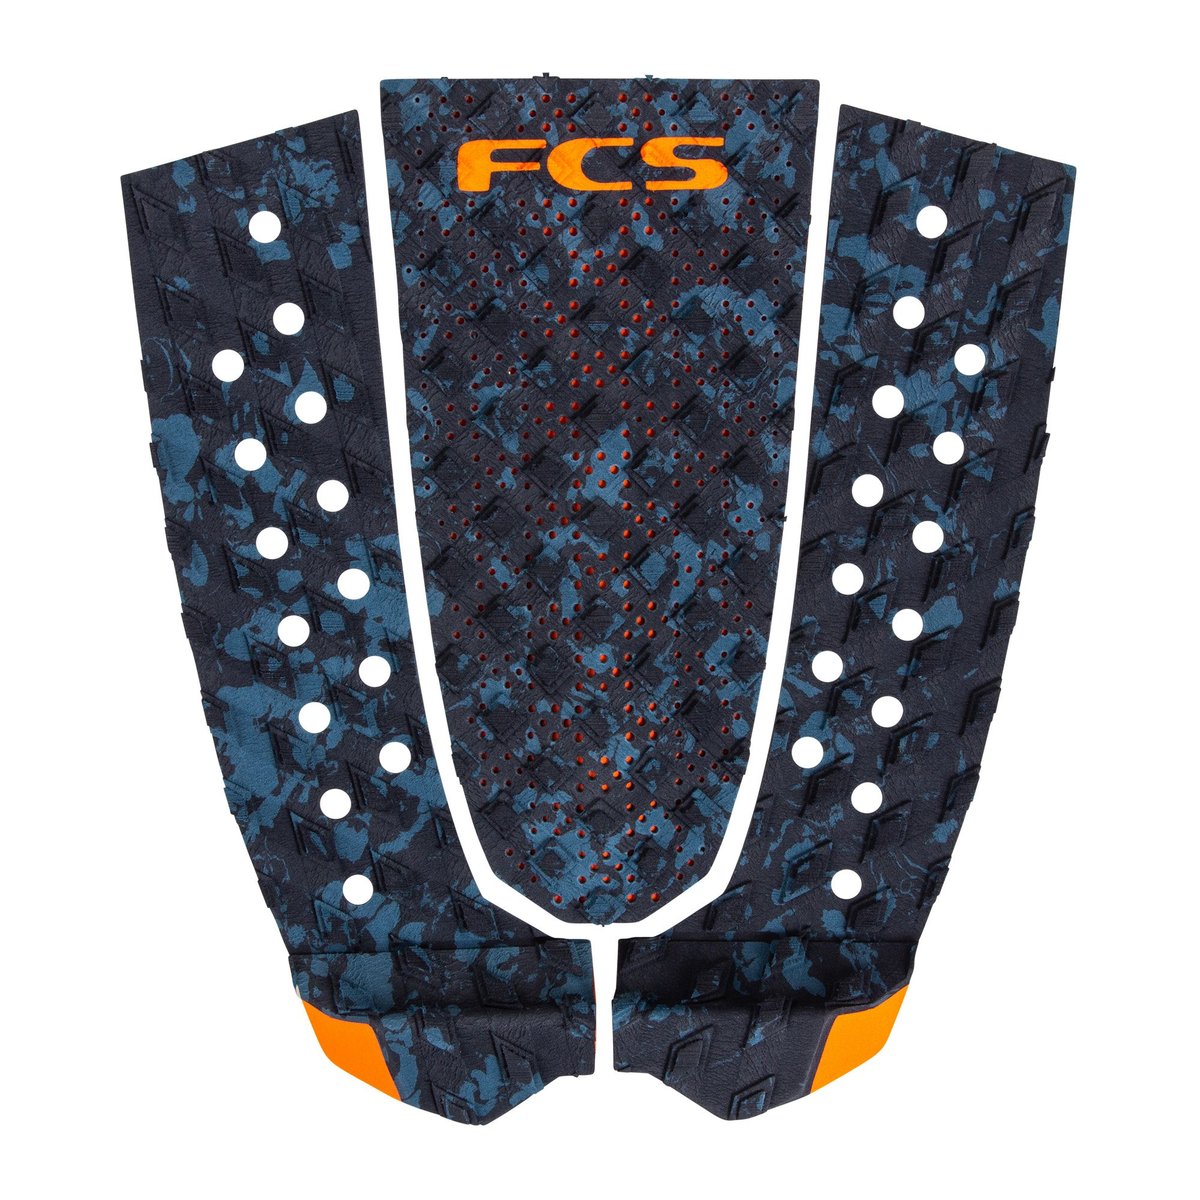 FCS T-3 Traction Pad 3 piece traction, designed to suit performance boards. Traction Pad